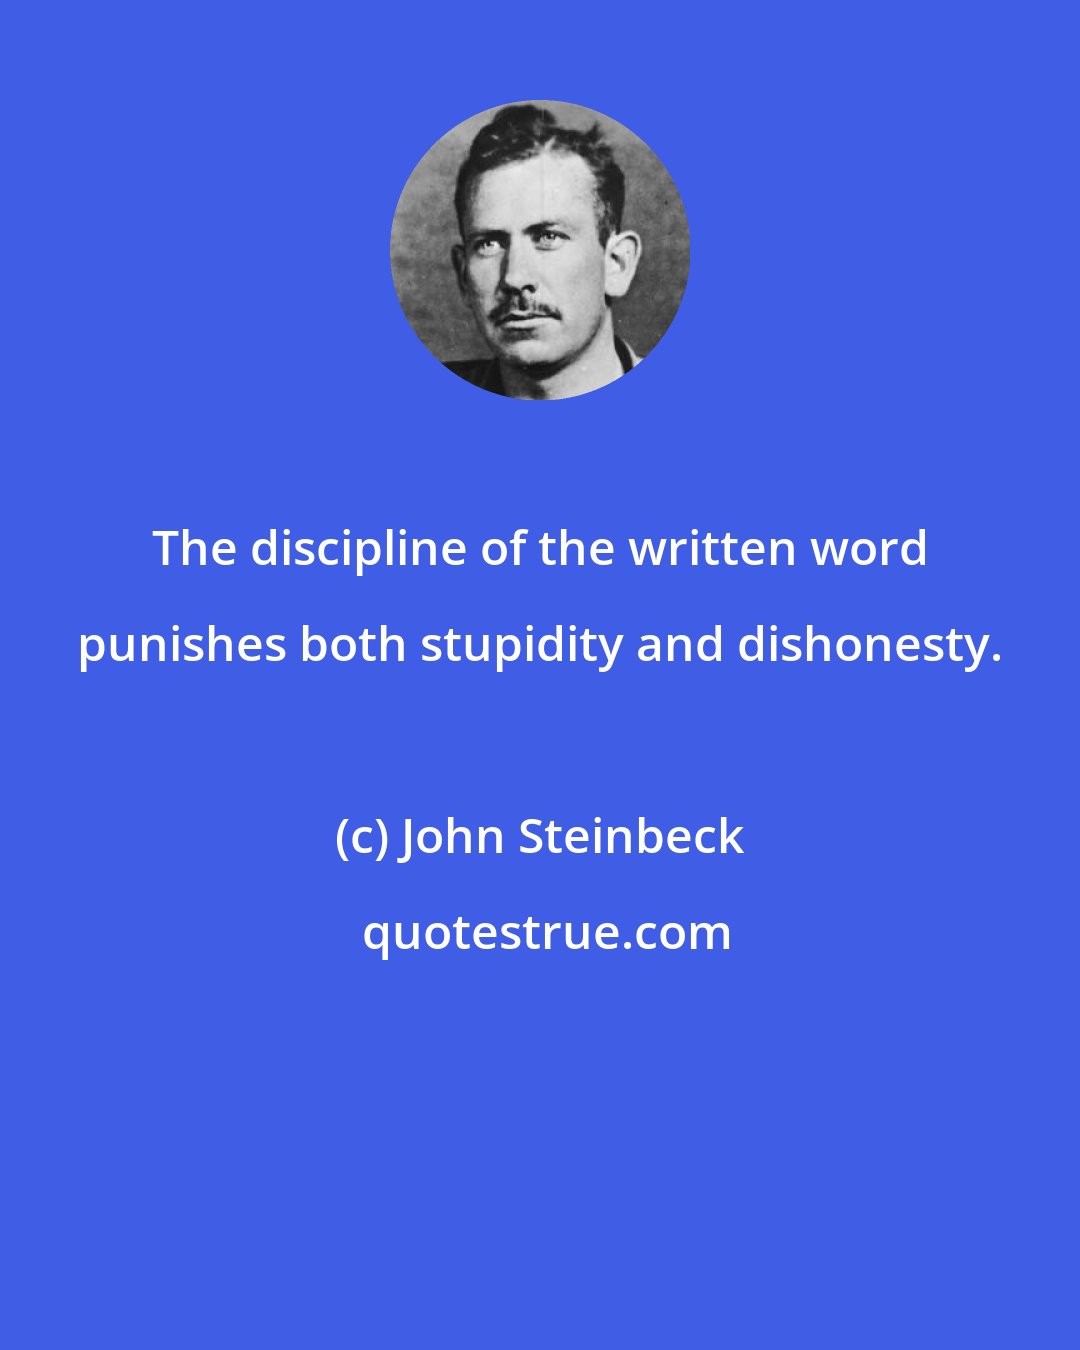 John Steinbeck: The discipline of the written word punishes both stupidity and dishonesty.